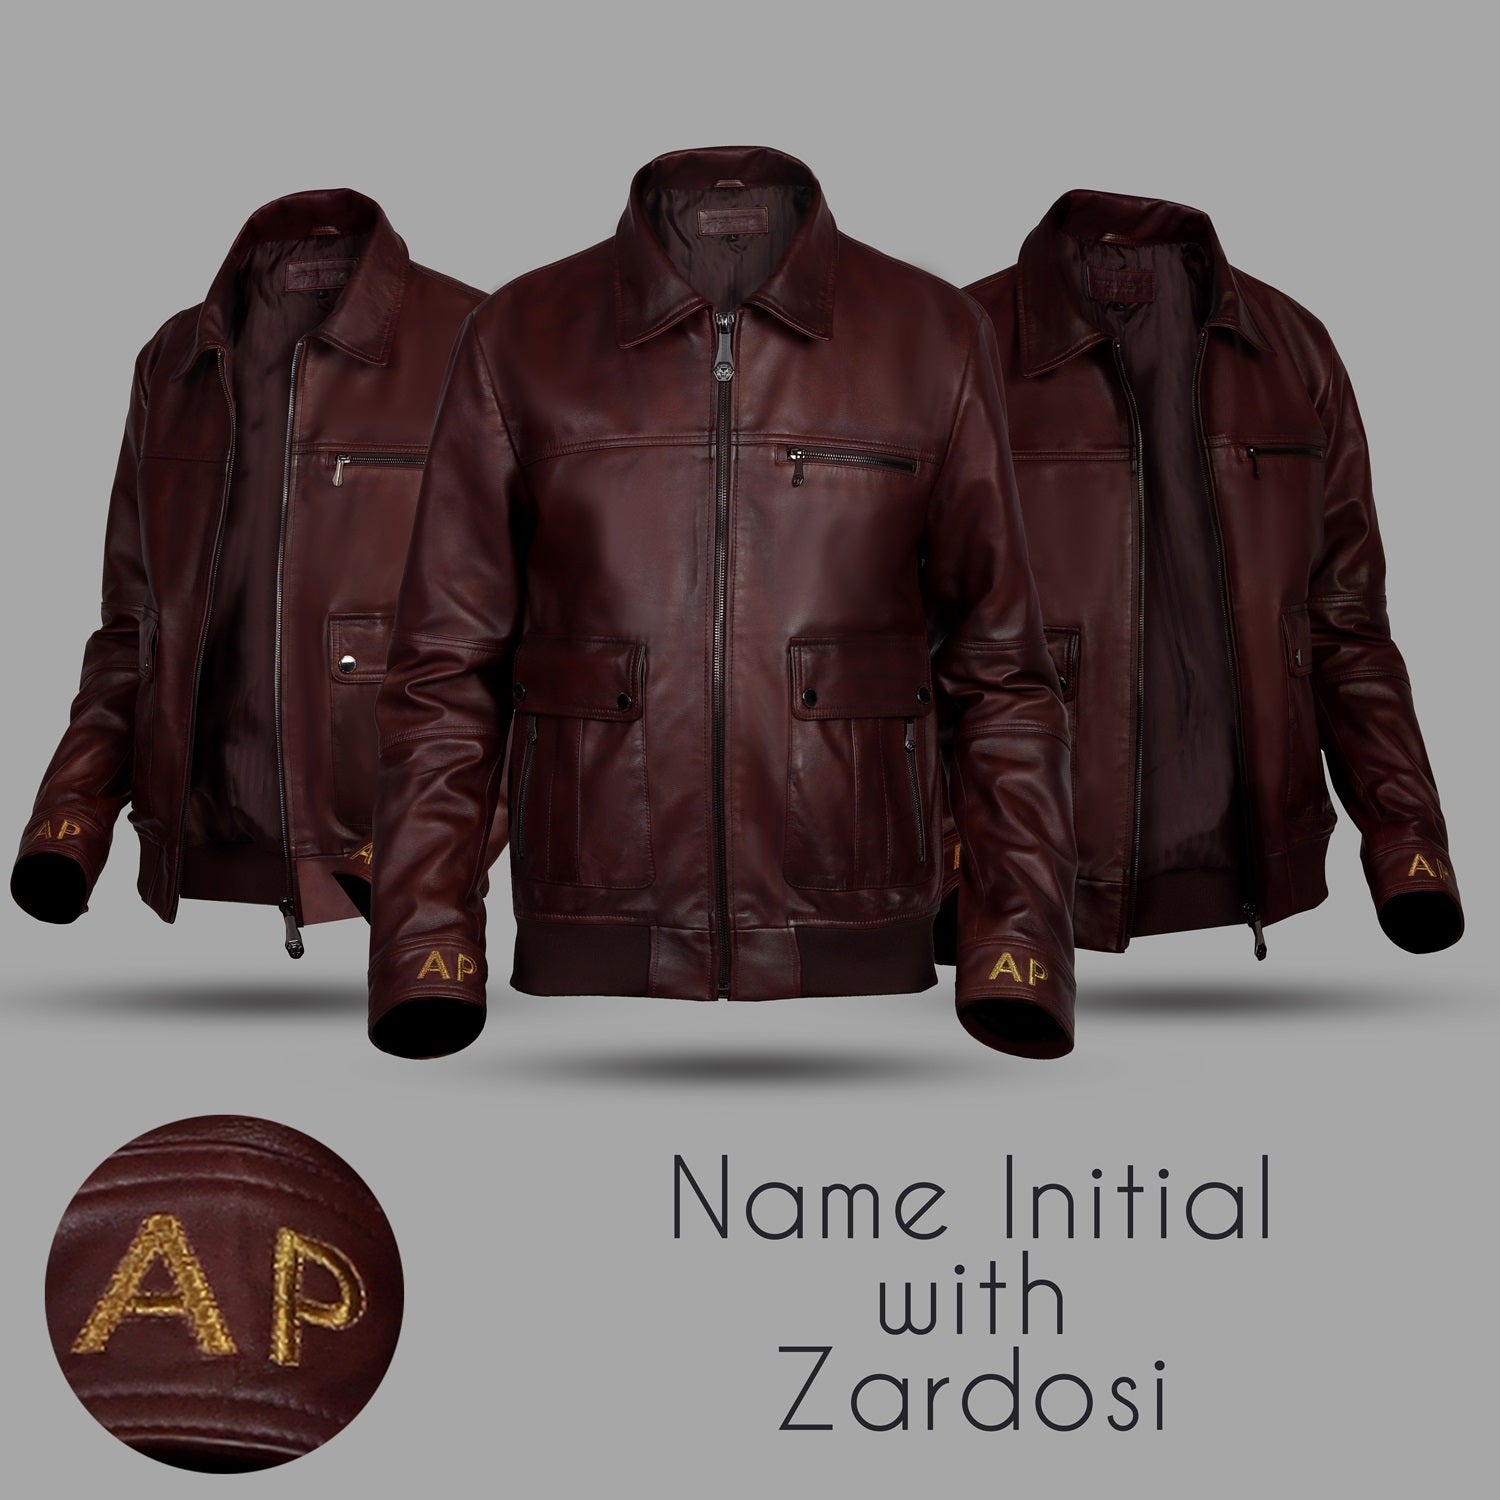 Dark Brown Leather Jacket Customized "AP" Embroidered Initial